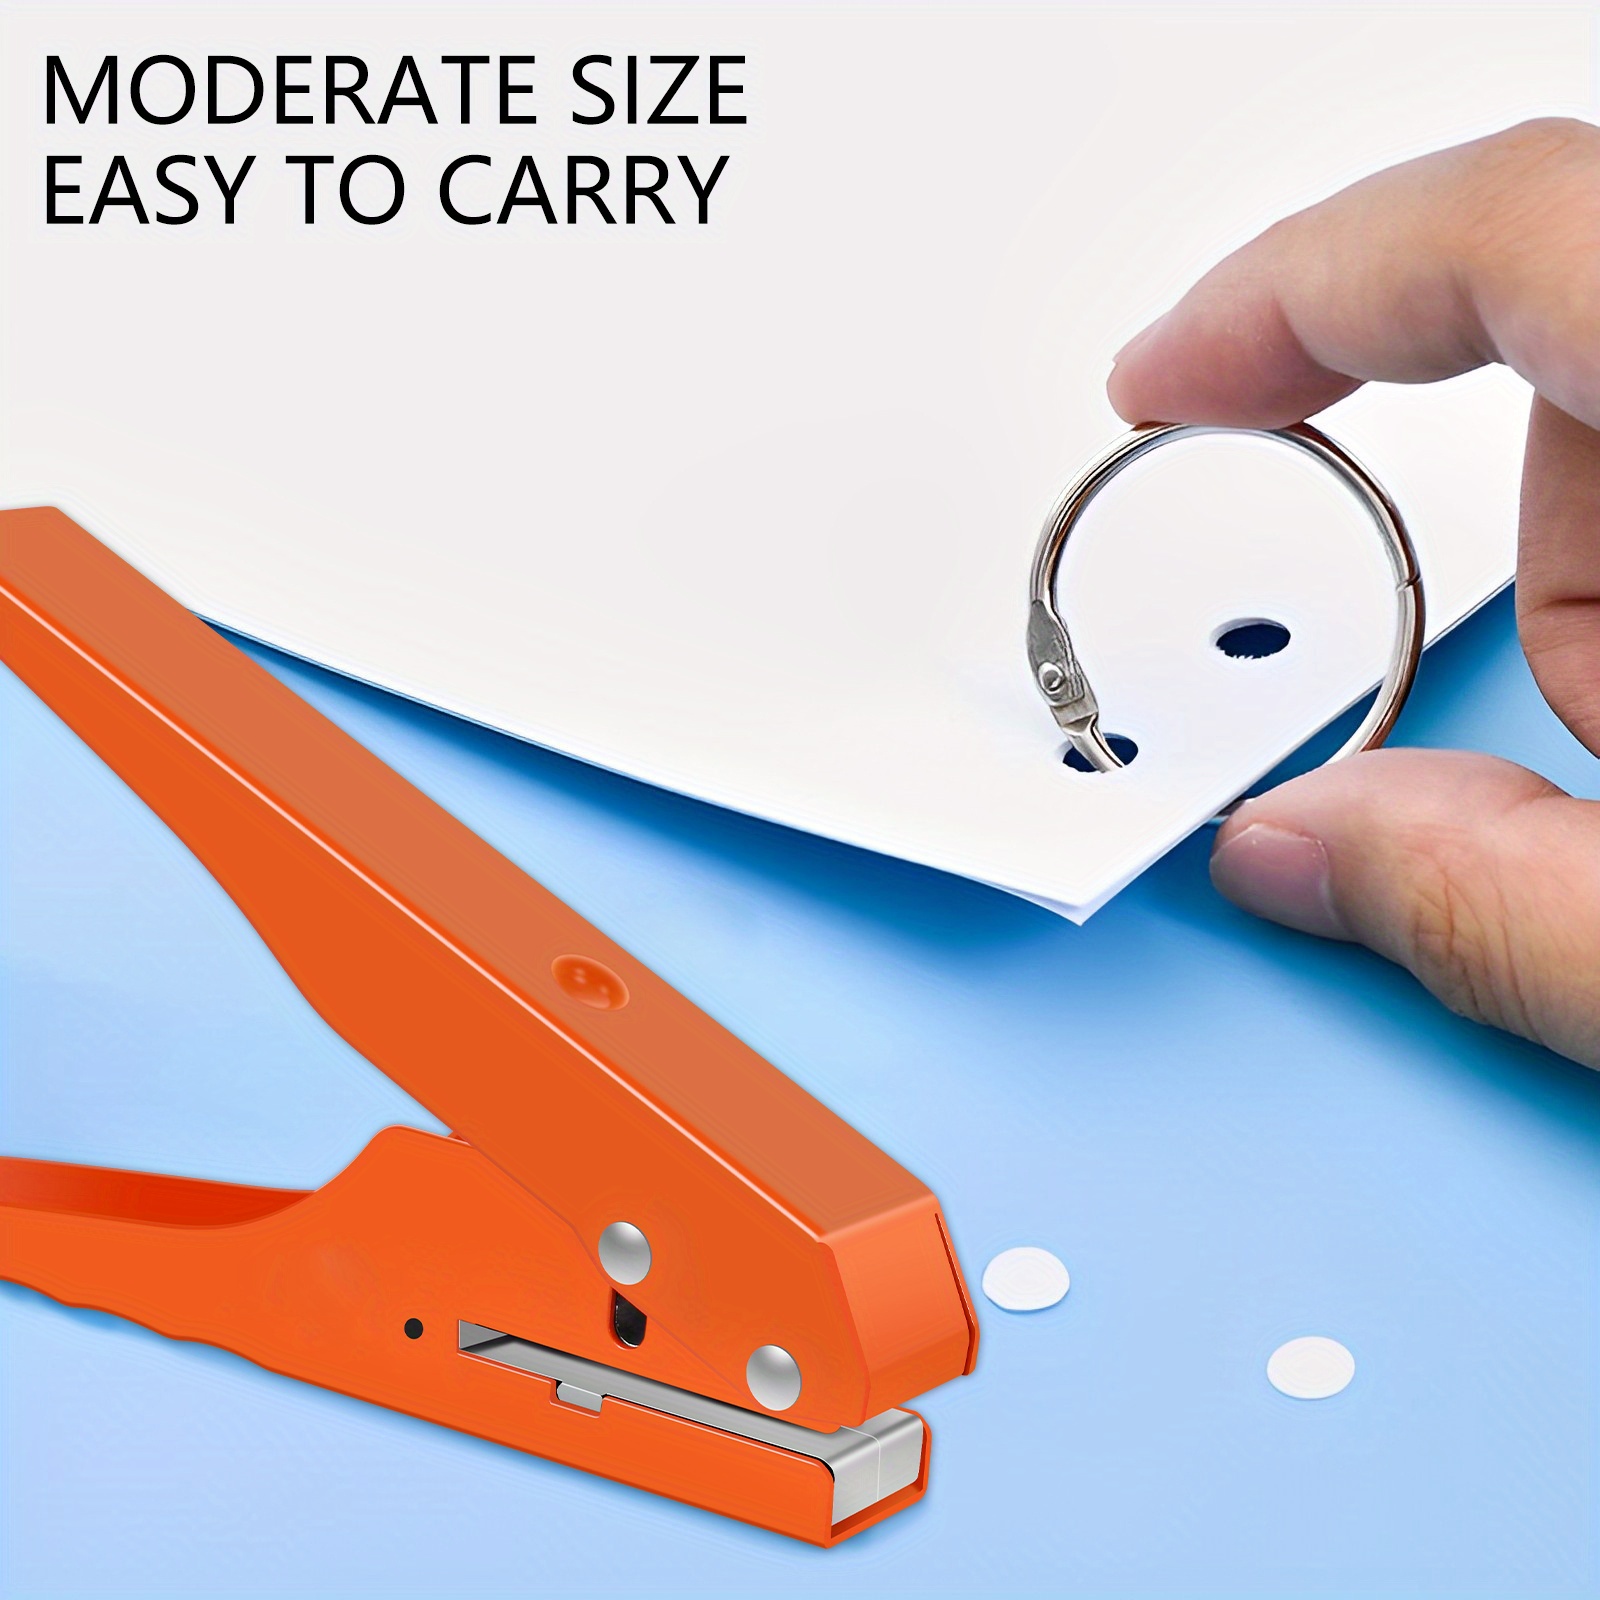 Single Hole Punch,Hole Punch Paper Hole Puncher Heavy Duty Single Hole  Punch Hole Punches Paper Punch Portable Hand Held for Tags Paper Cards  Plastic